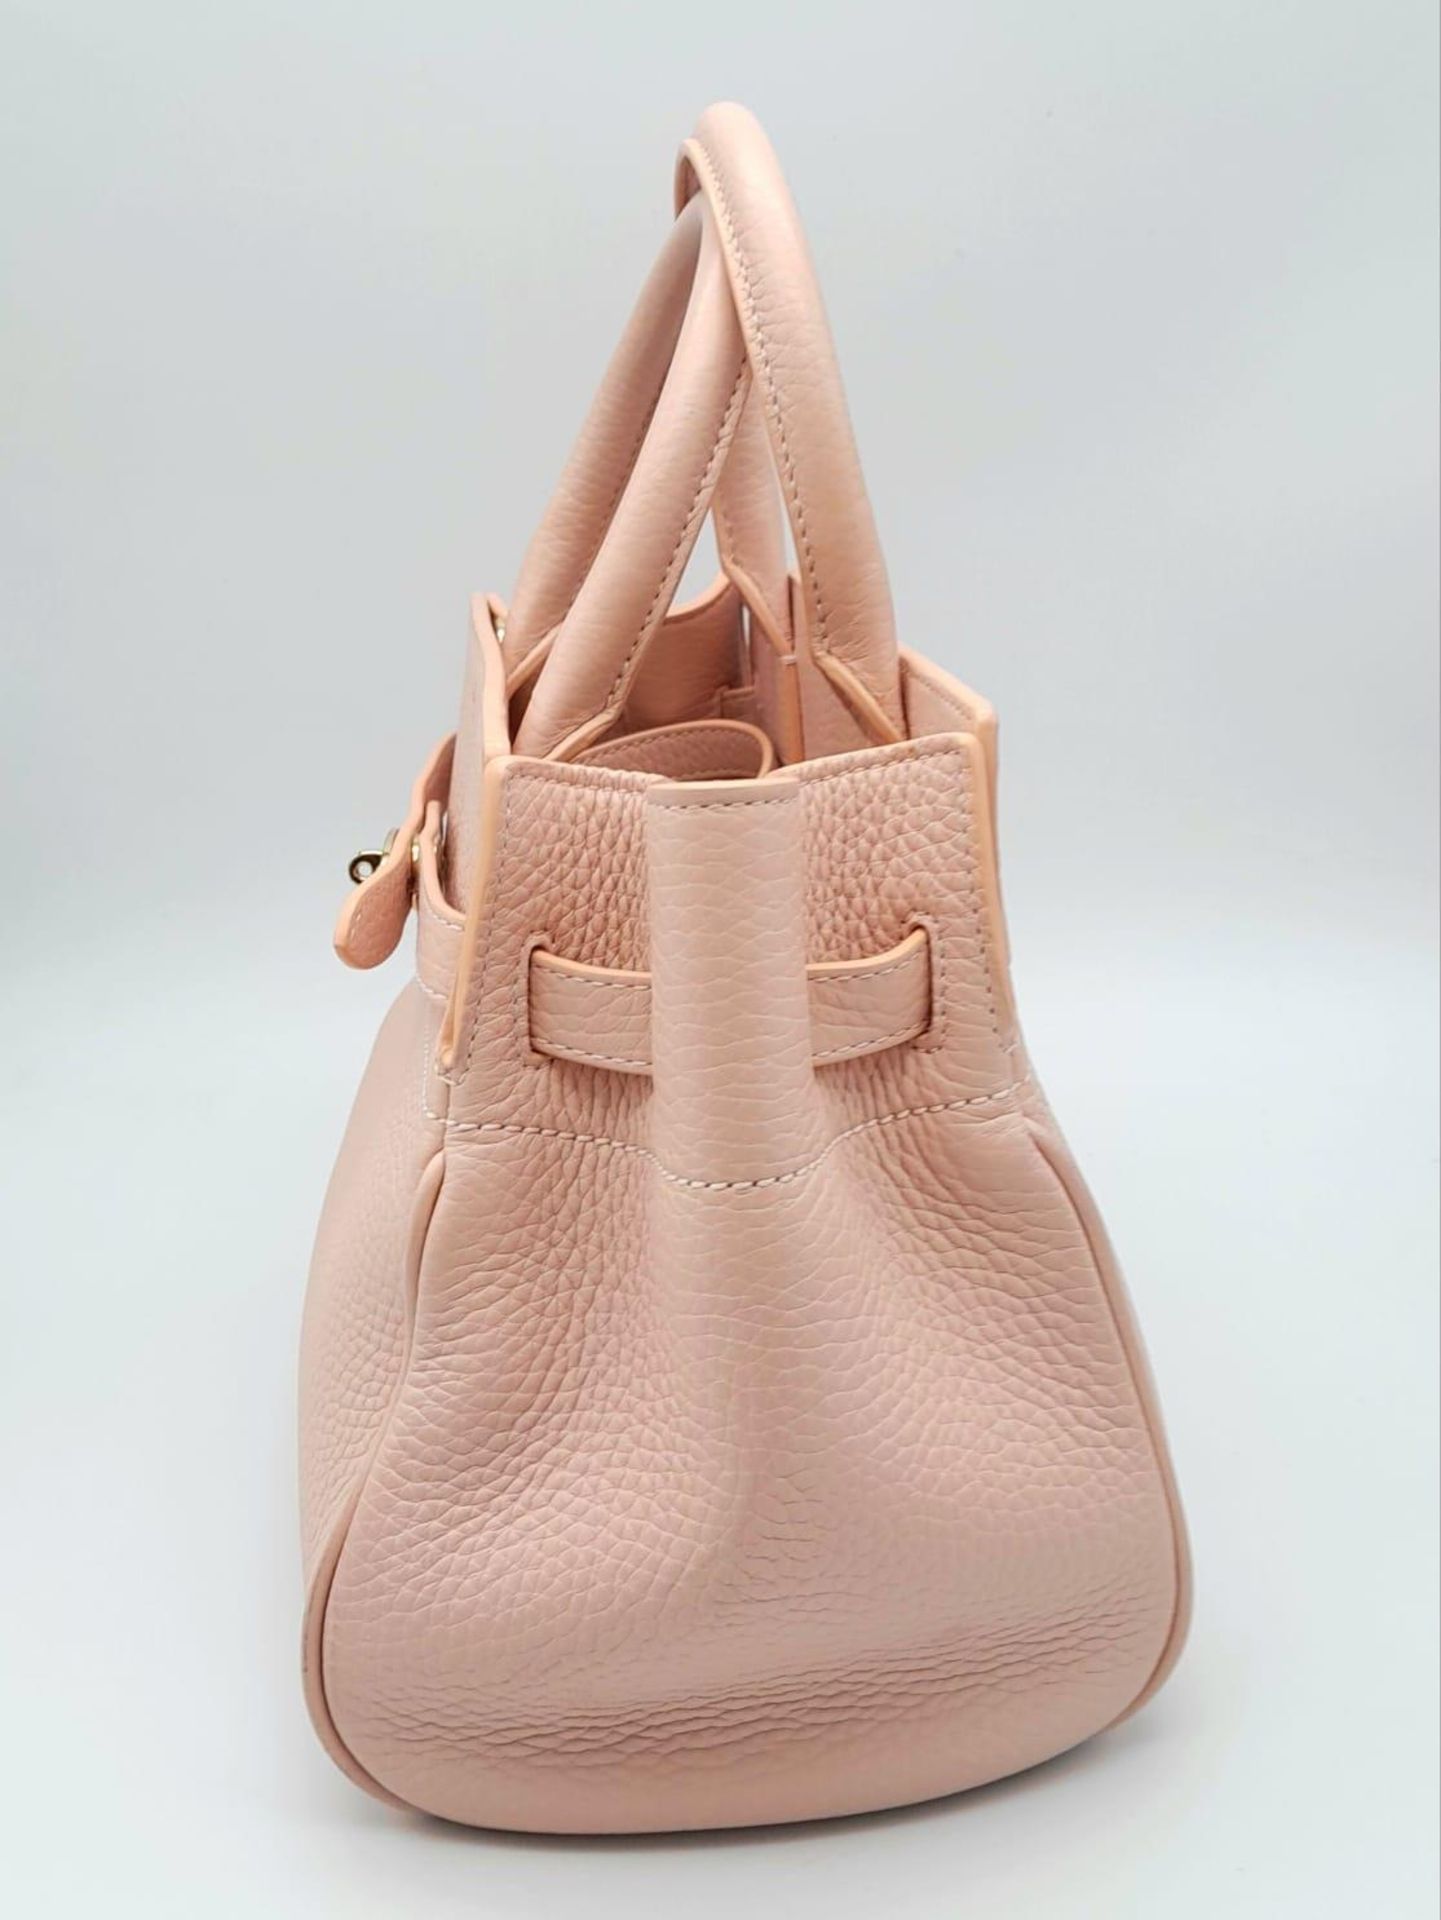 A Mulberry Small Belted Bayswater Handbag in Icy Pink Heavy Grain with Pastel Tartan Fabric - Image 2 of 5